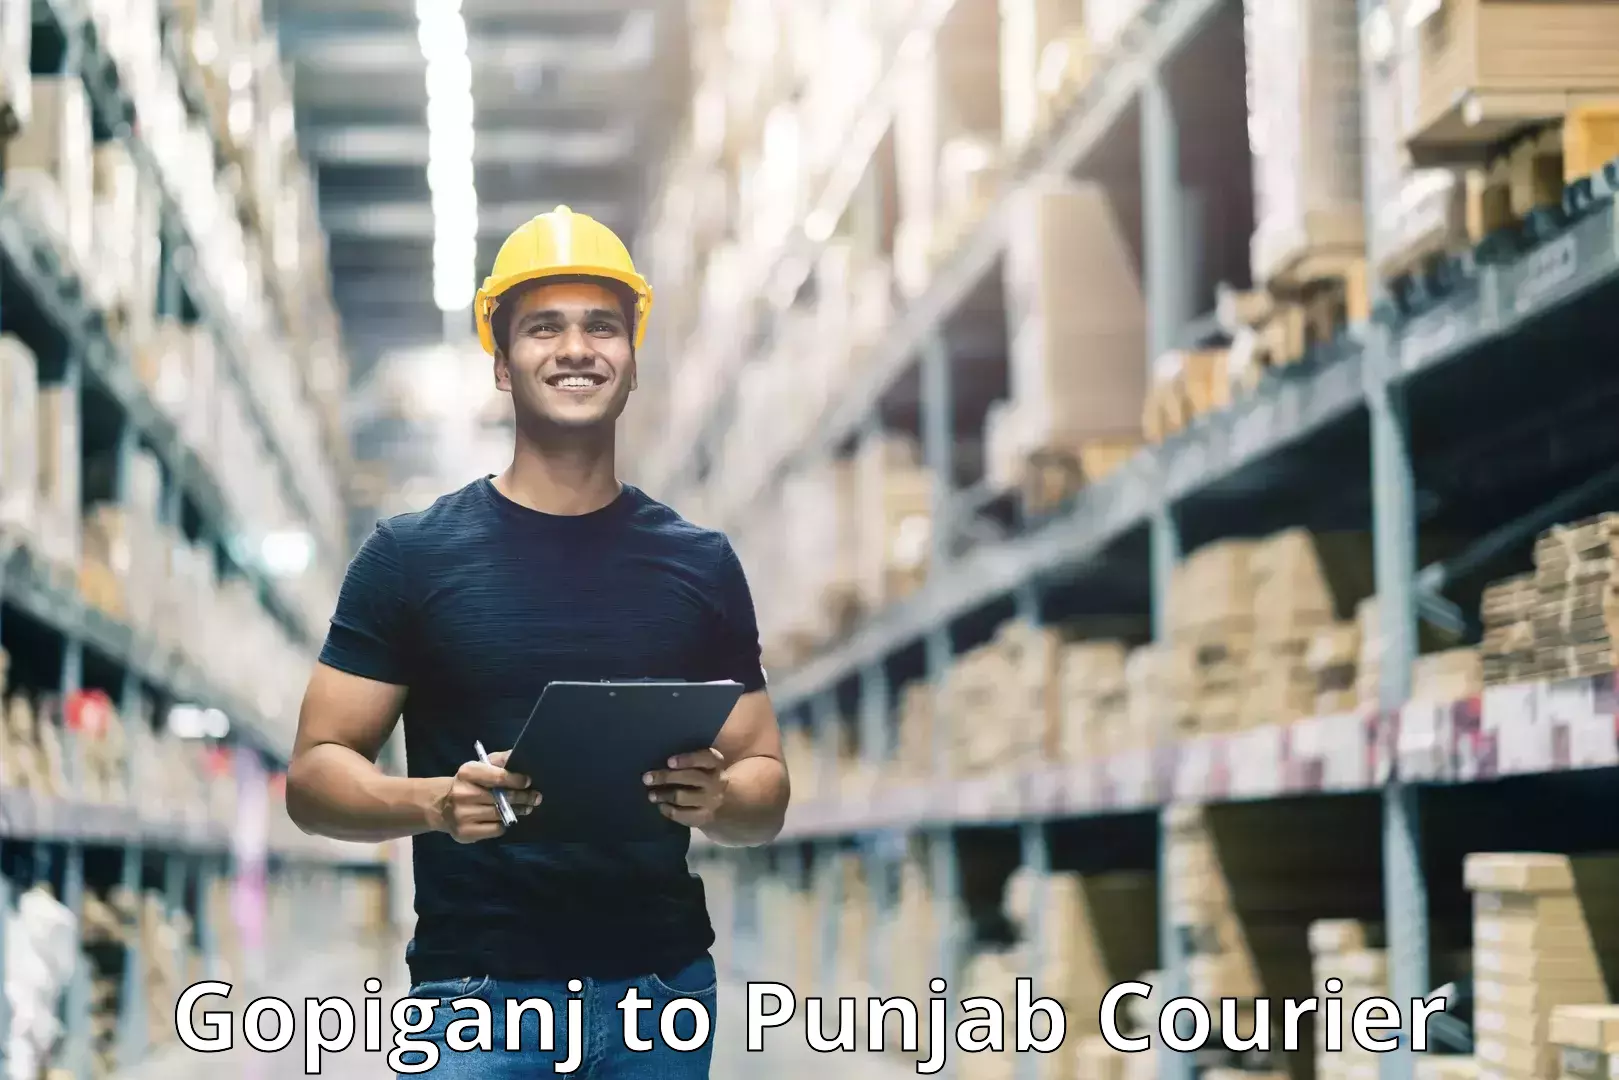 Fast-track shipping solutions Gopiganj to Punjab